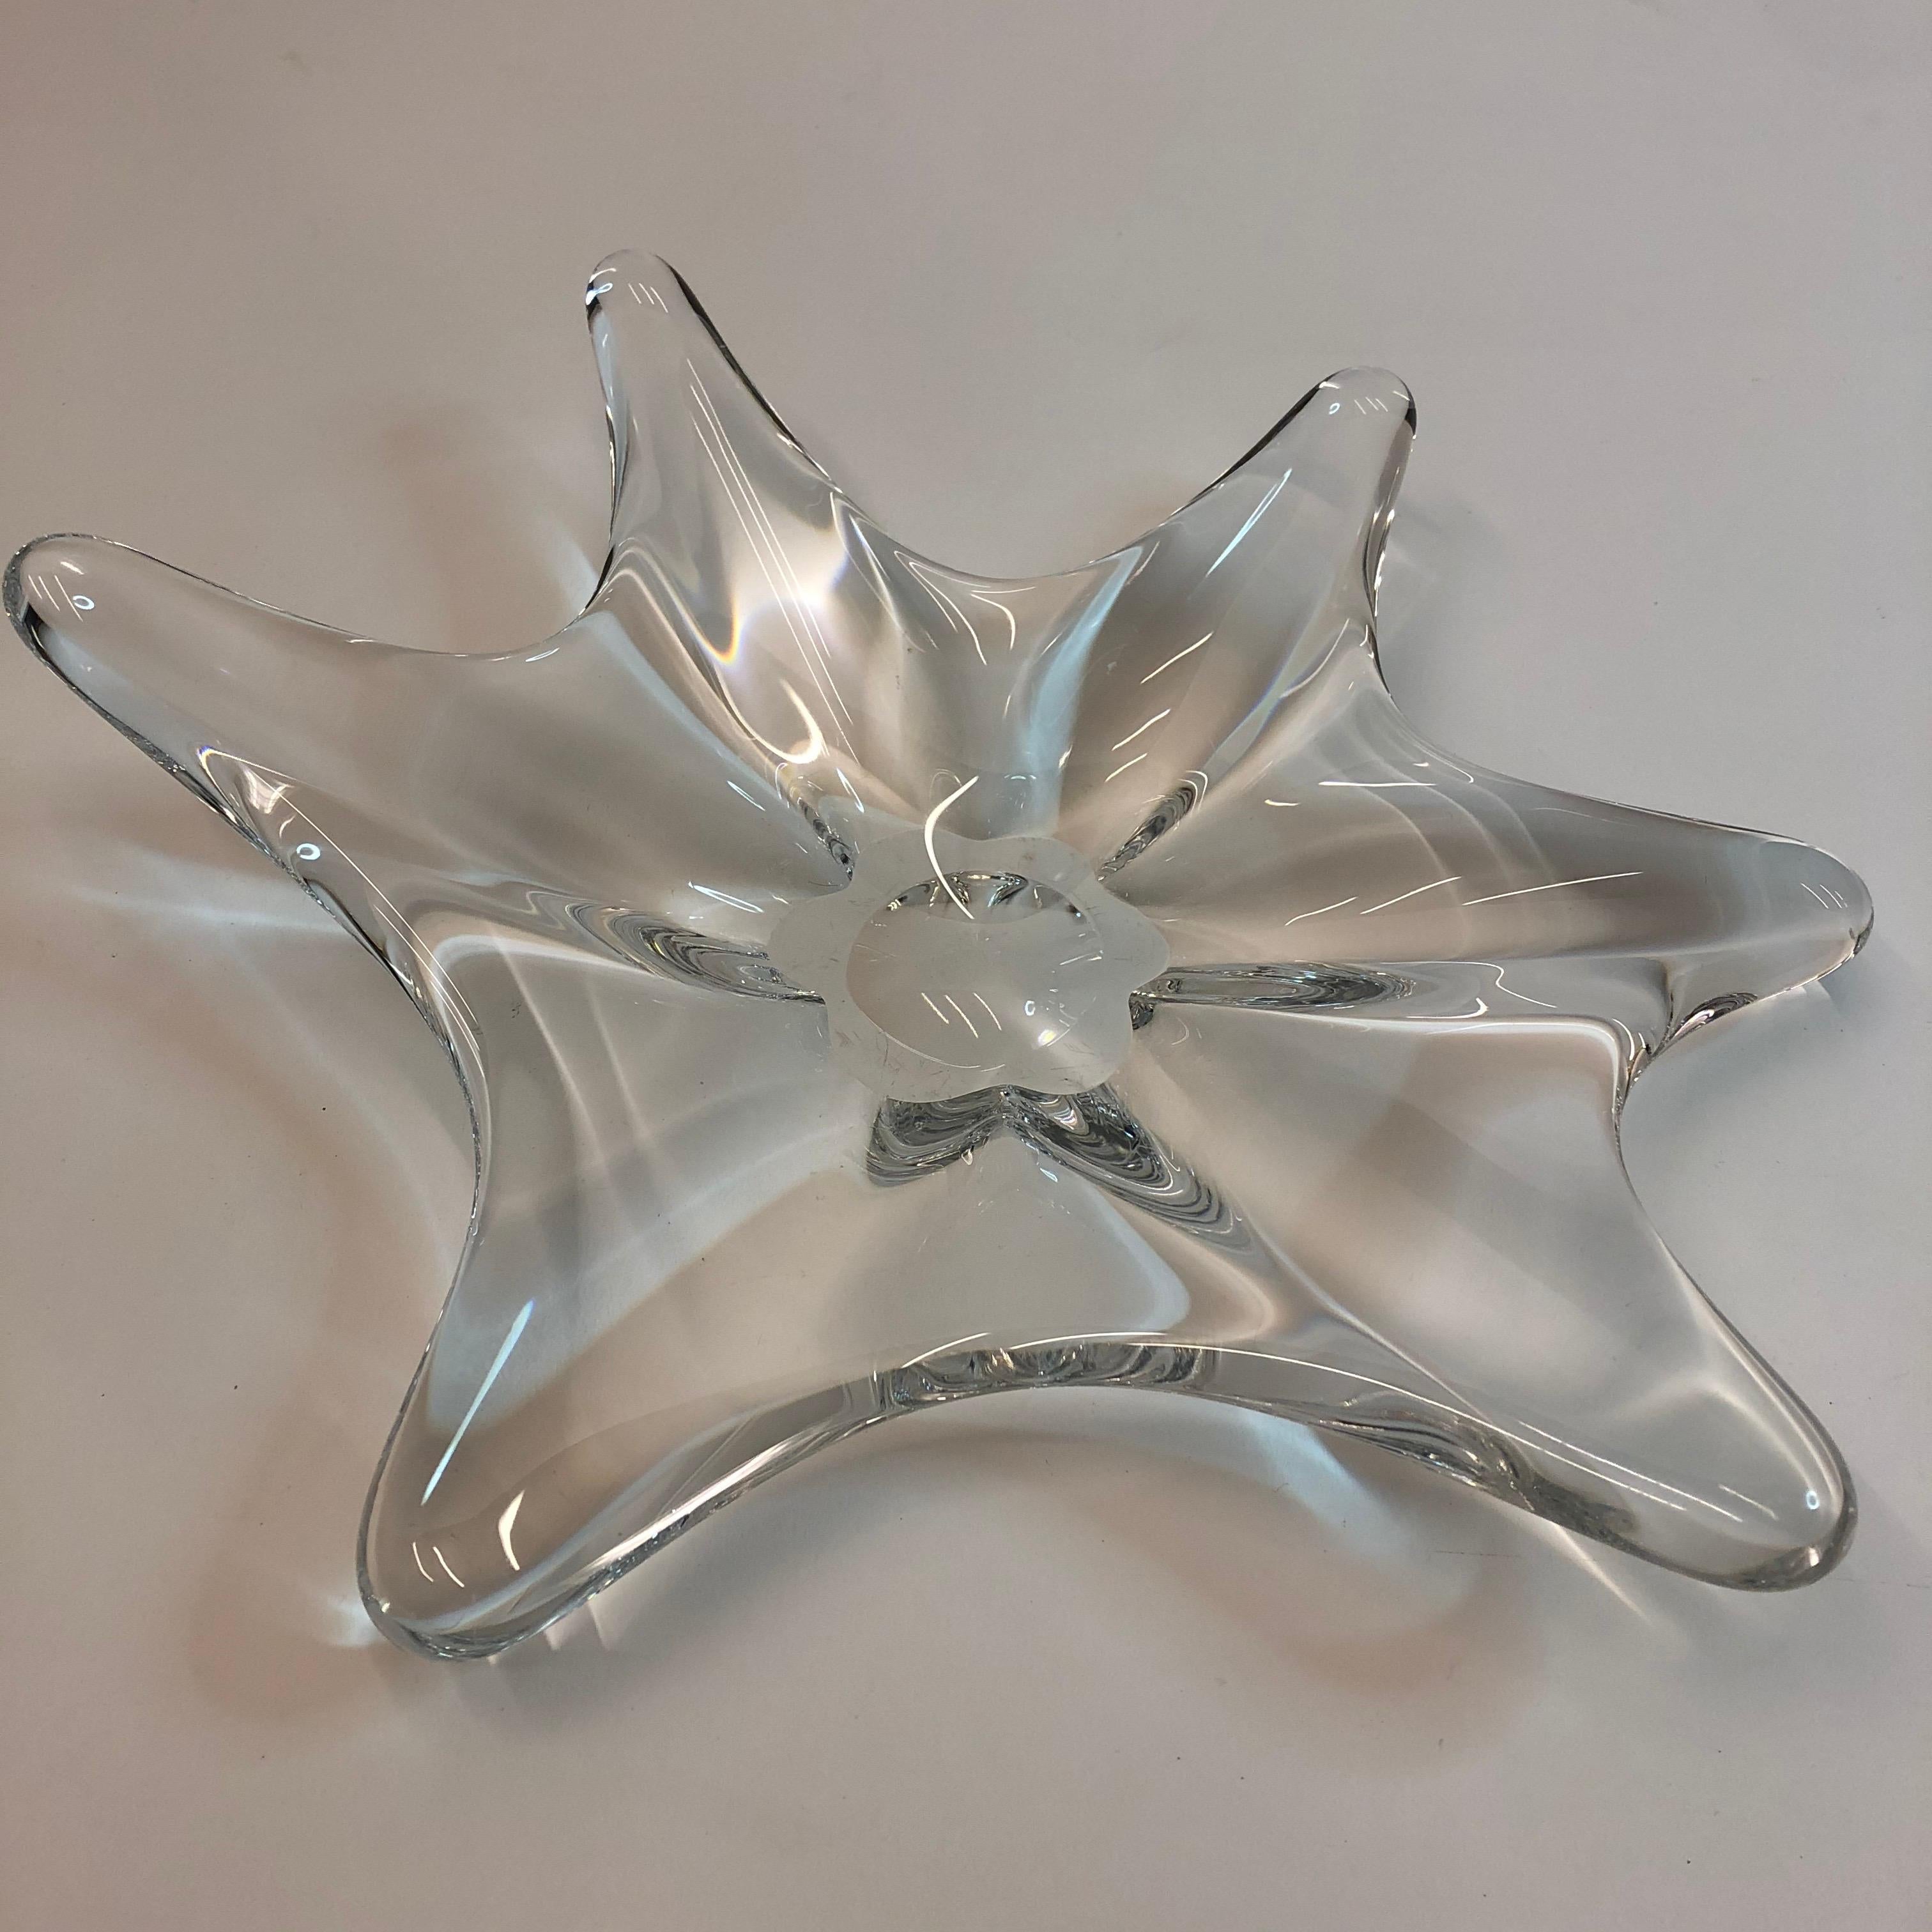 Baccarat France Splash glass dish / decorative bowl. This piece is stamped on the bottom.
Beautiful organic crystal dish which almost looks liquid. 
De dish is in very good almost excellent condition.